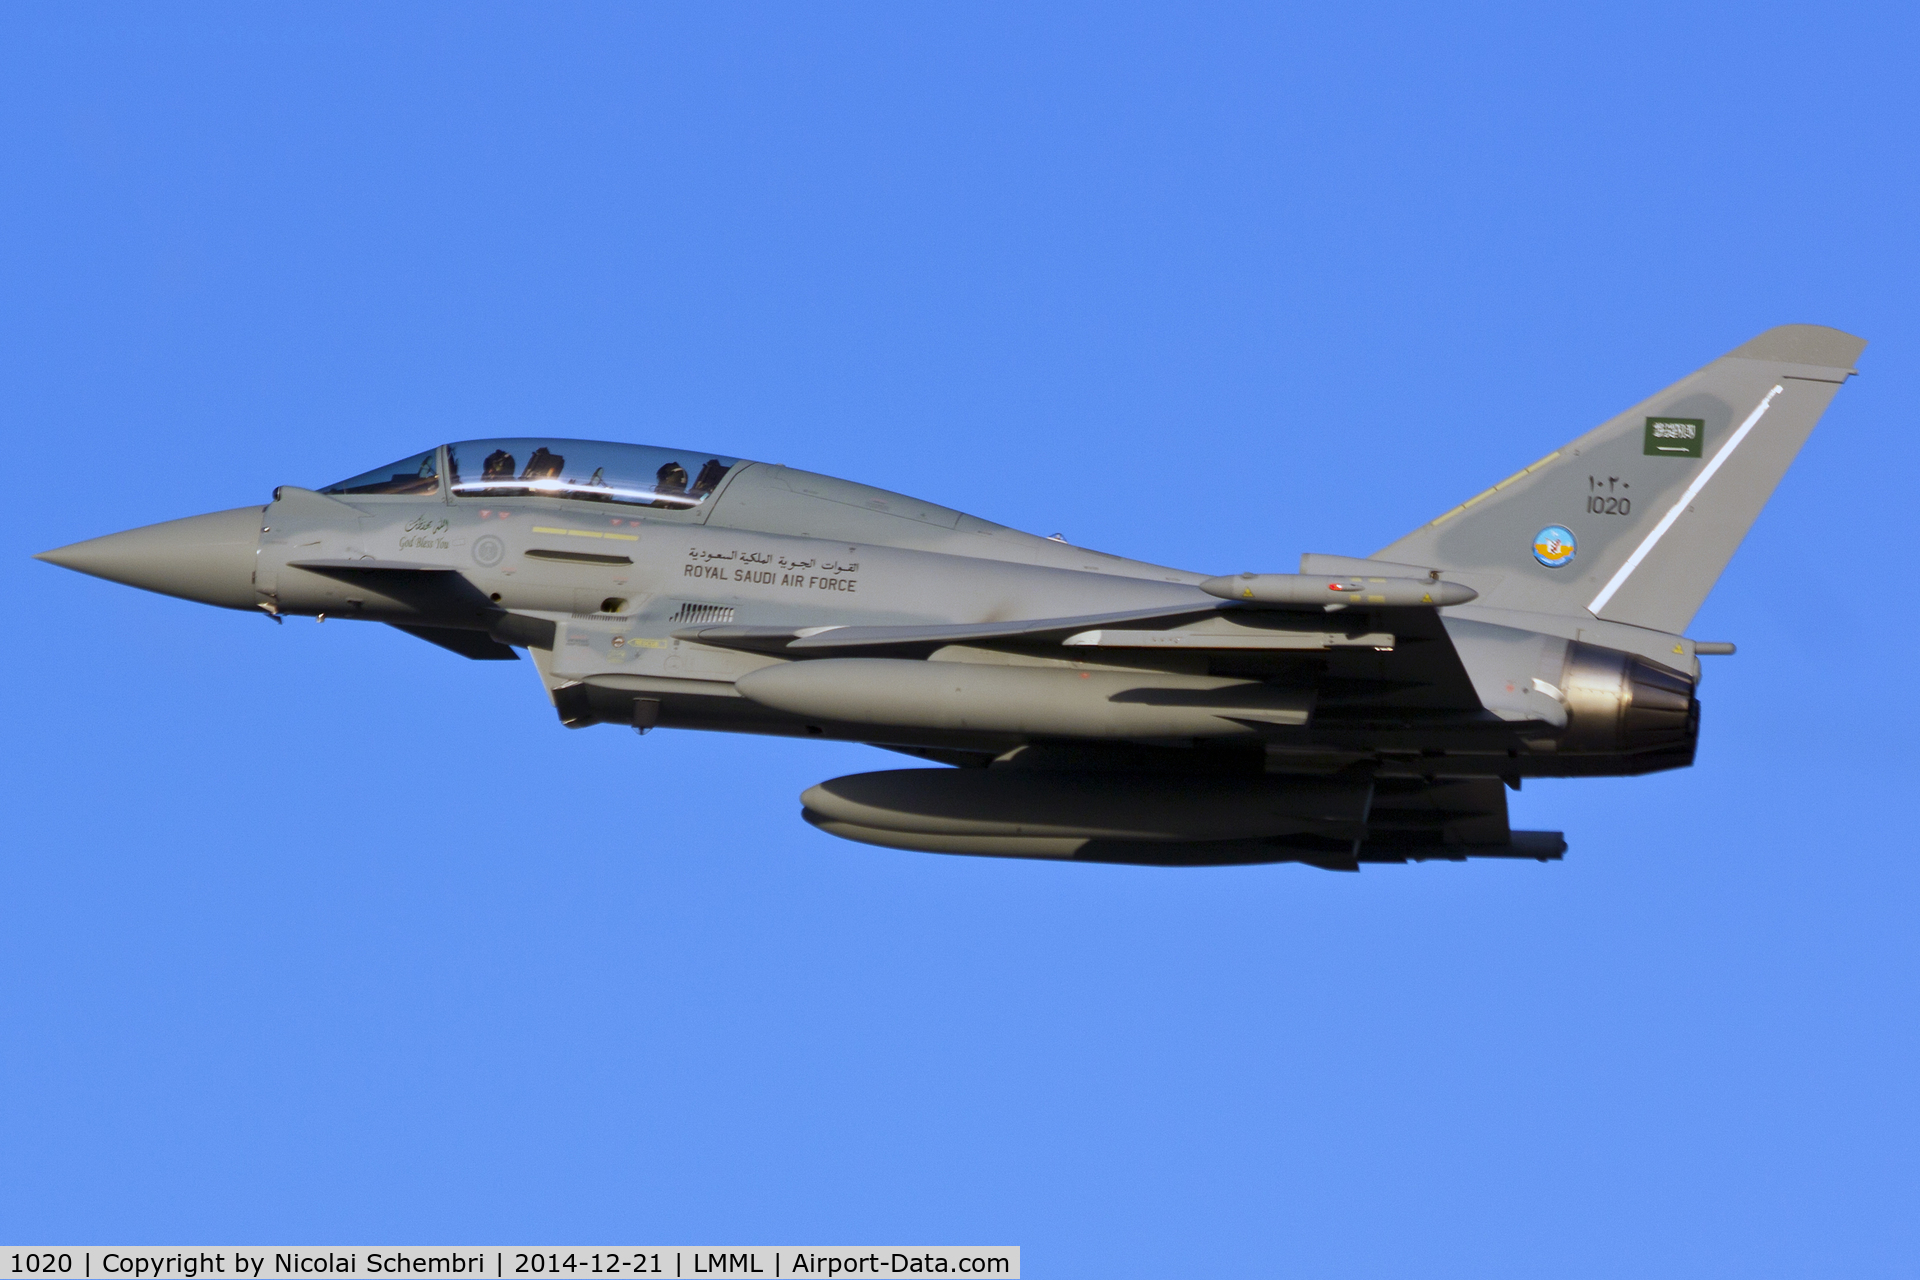 1020, 2014 Eurofighter EF-2000 Typhoon T3 C/N 424/CT017, Airborne from touch & go on arrival